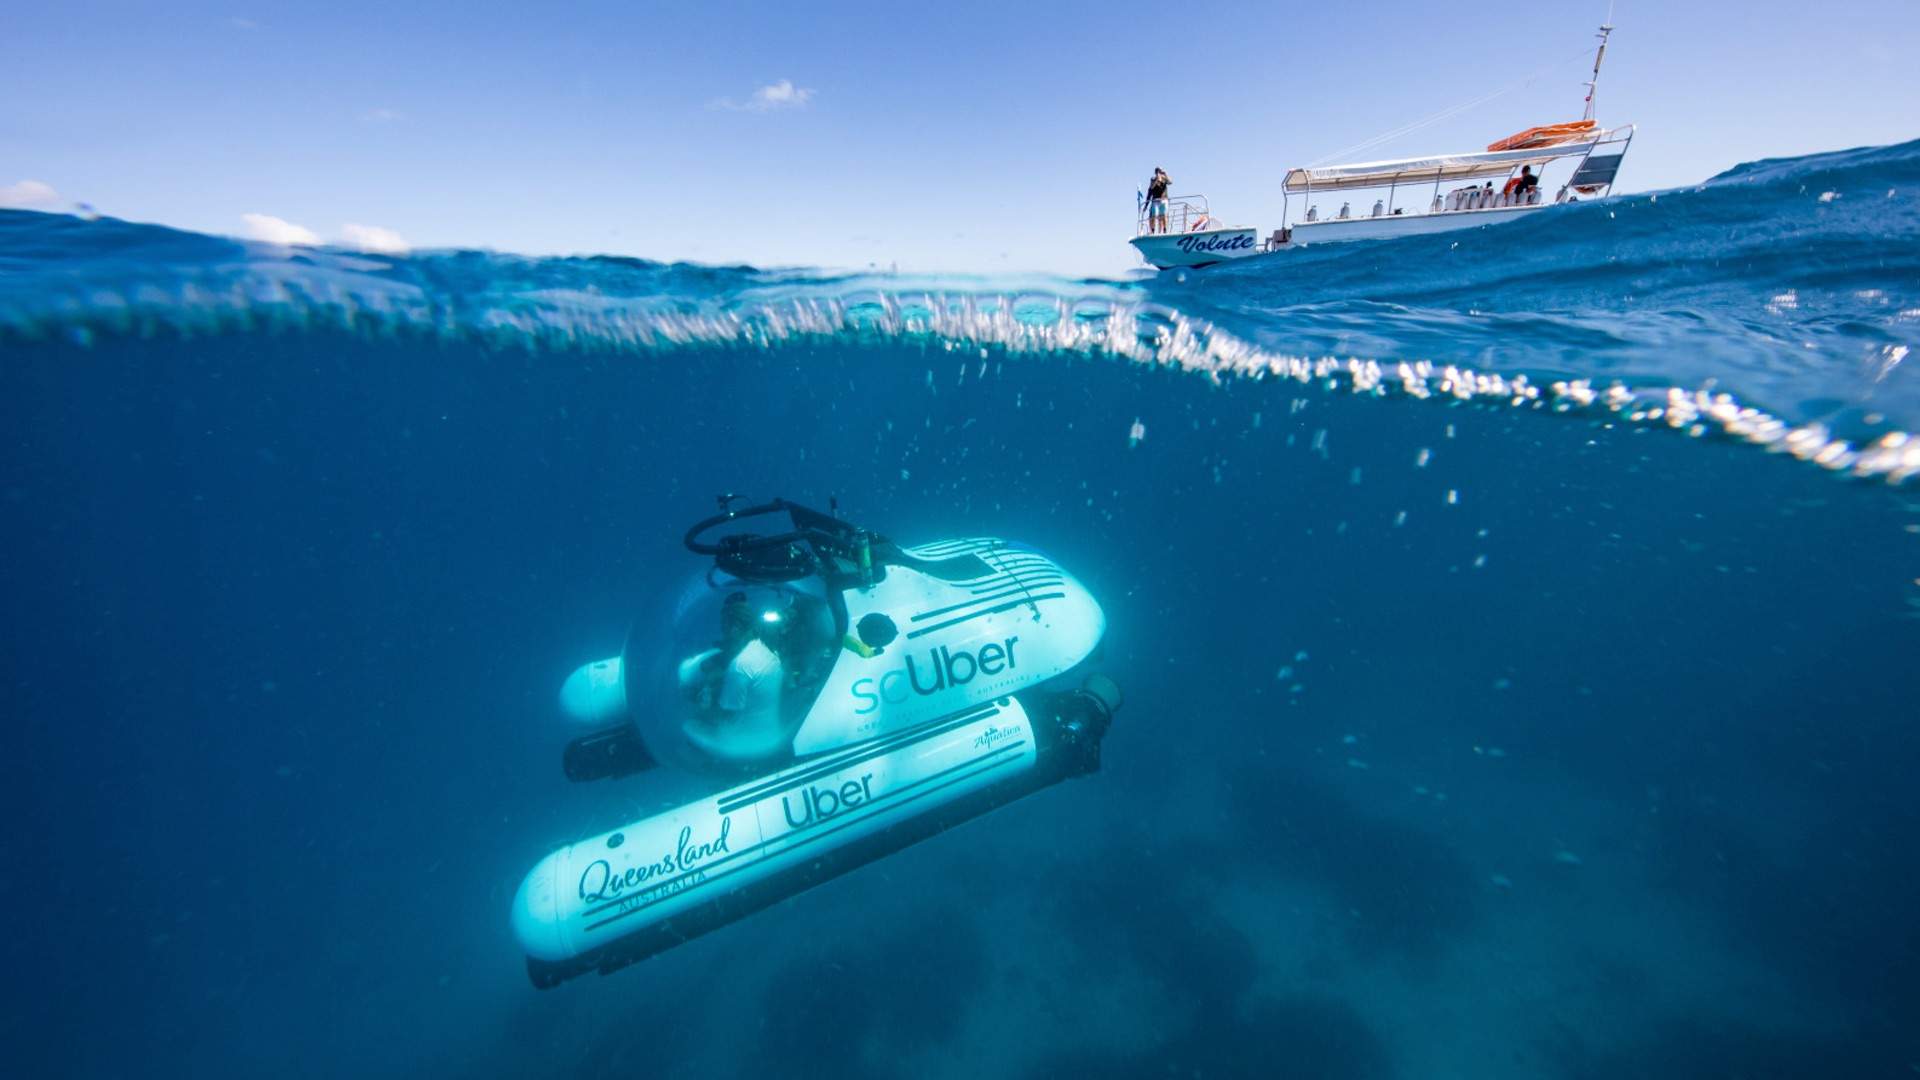 You Can Now Order an Uber Submarine to Explore the Depths of the Great Barrier Reef